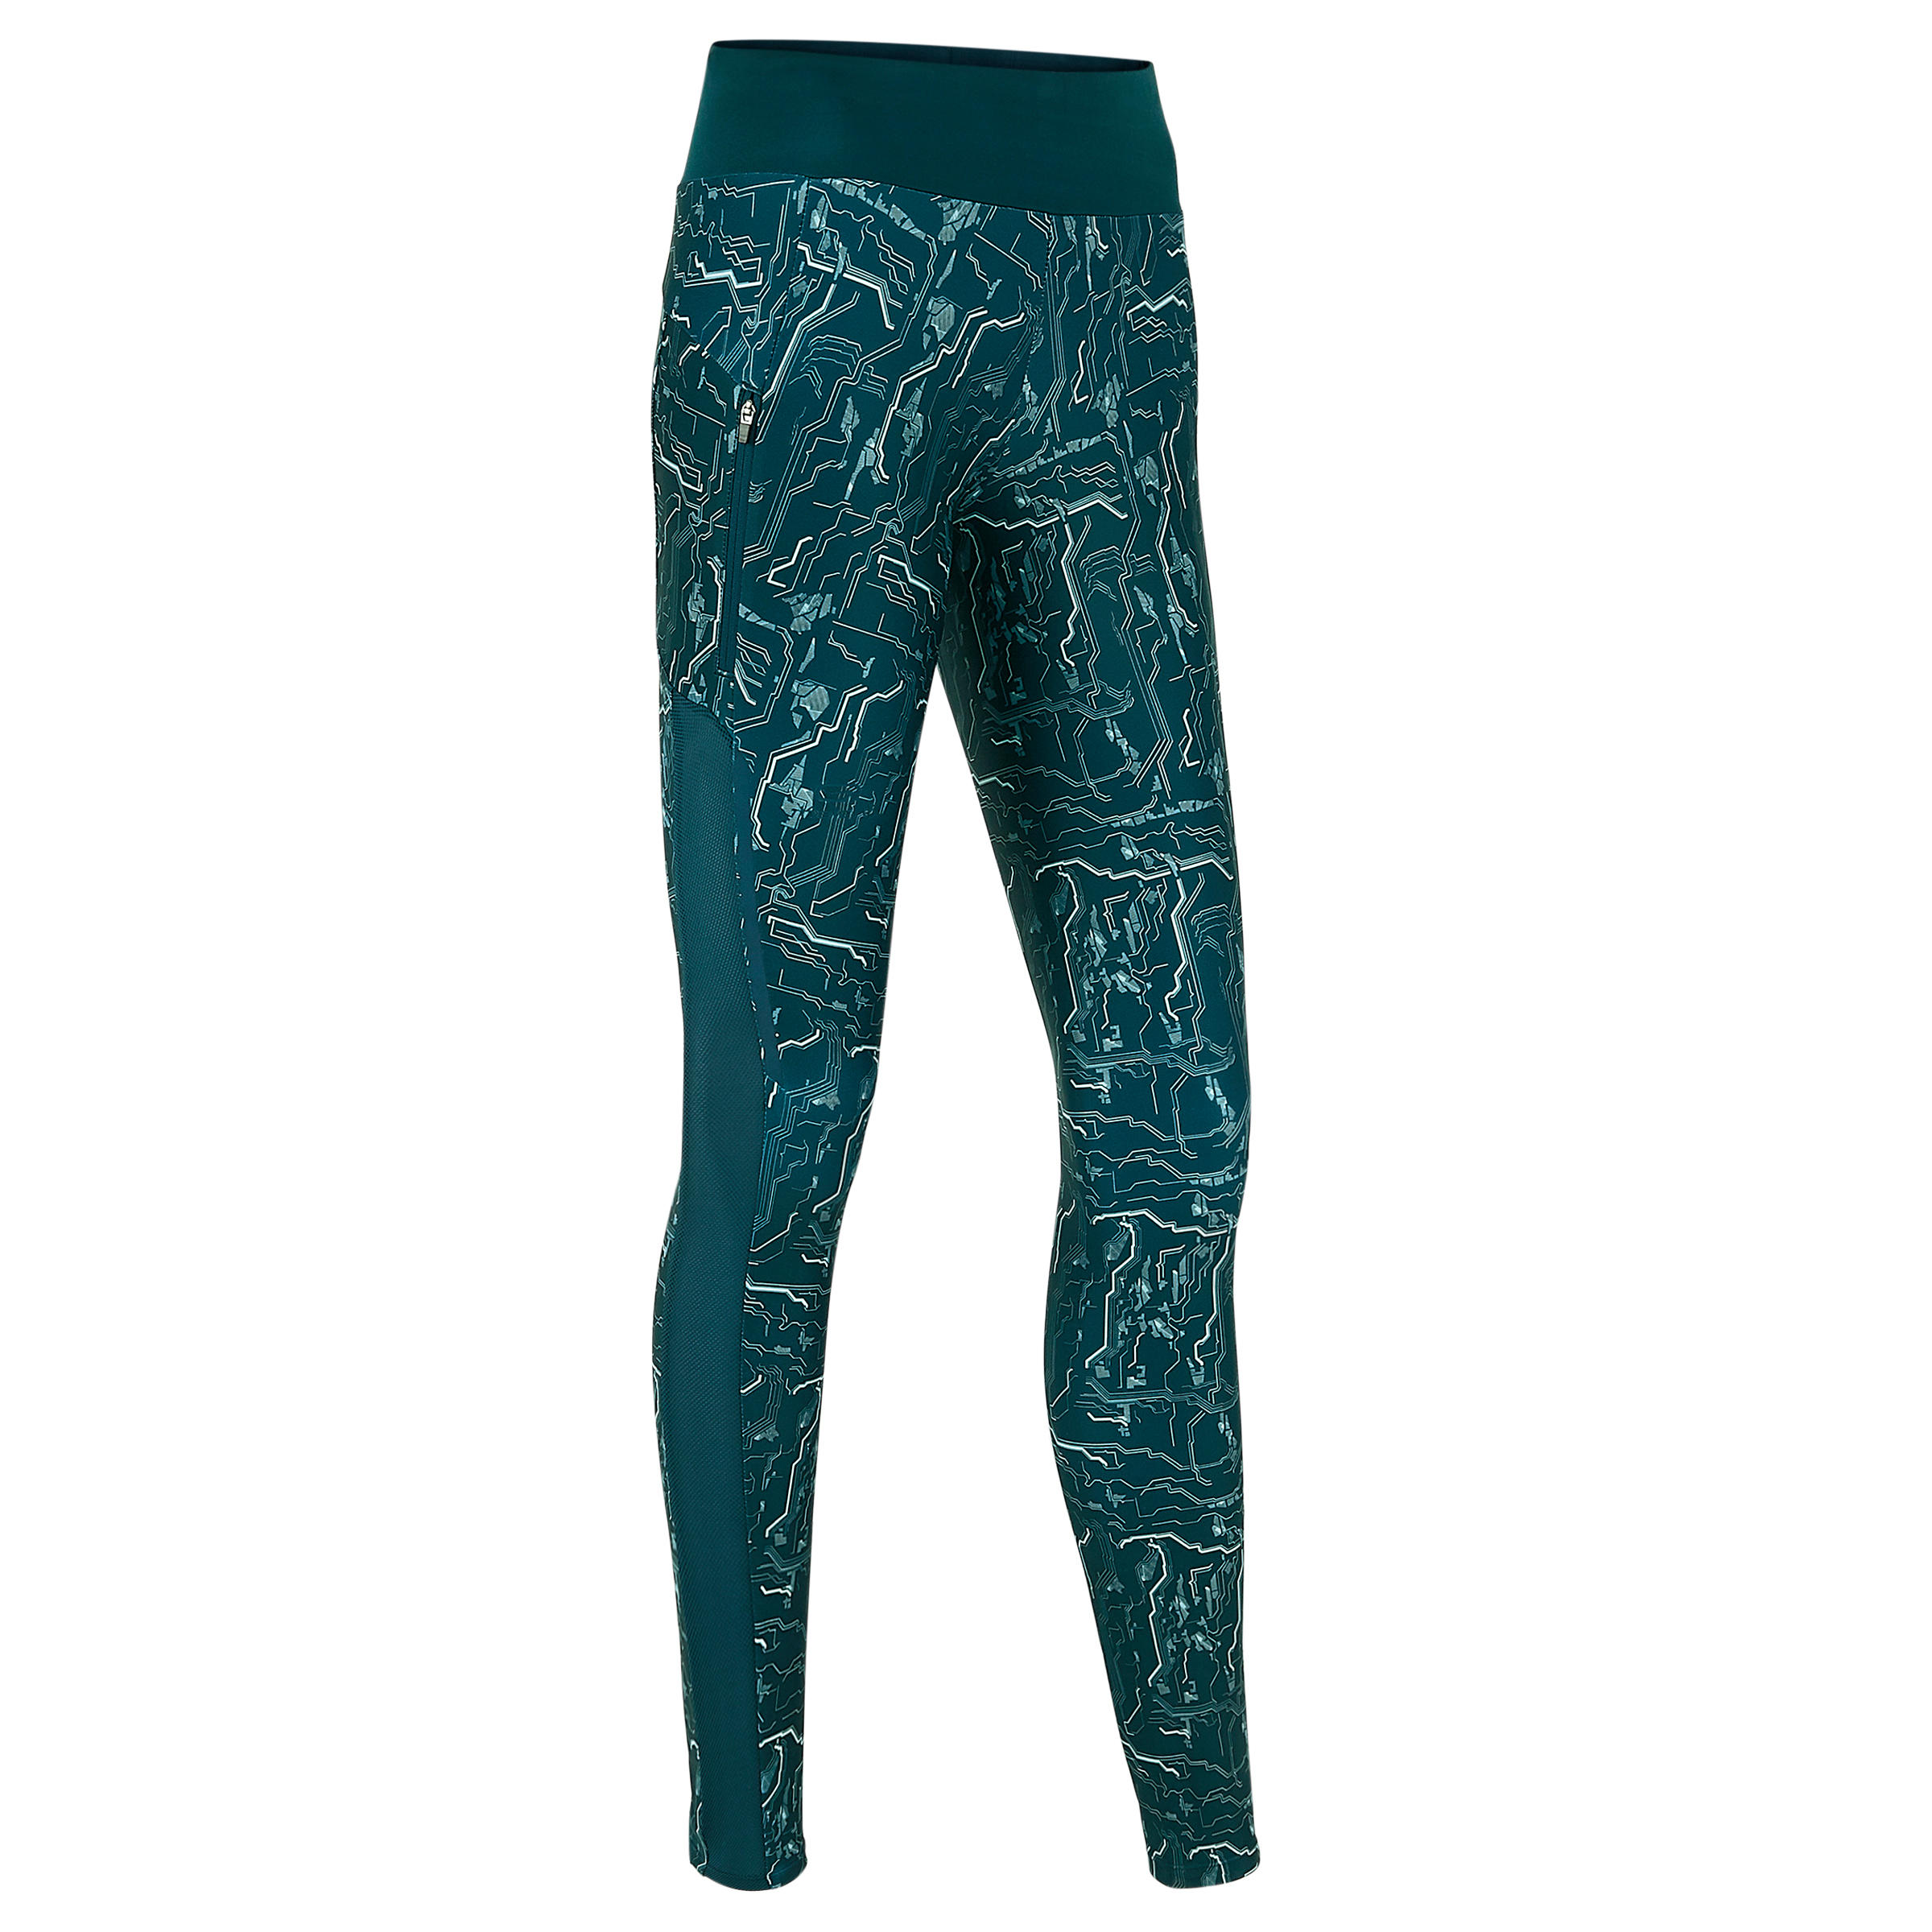 Women's running leggings with body-sculpting (XS to 5XL - Large